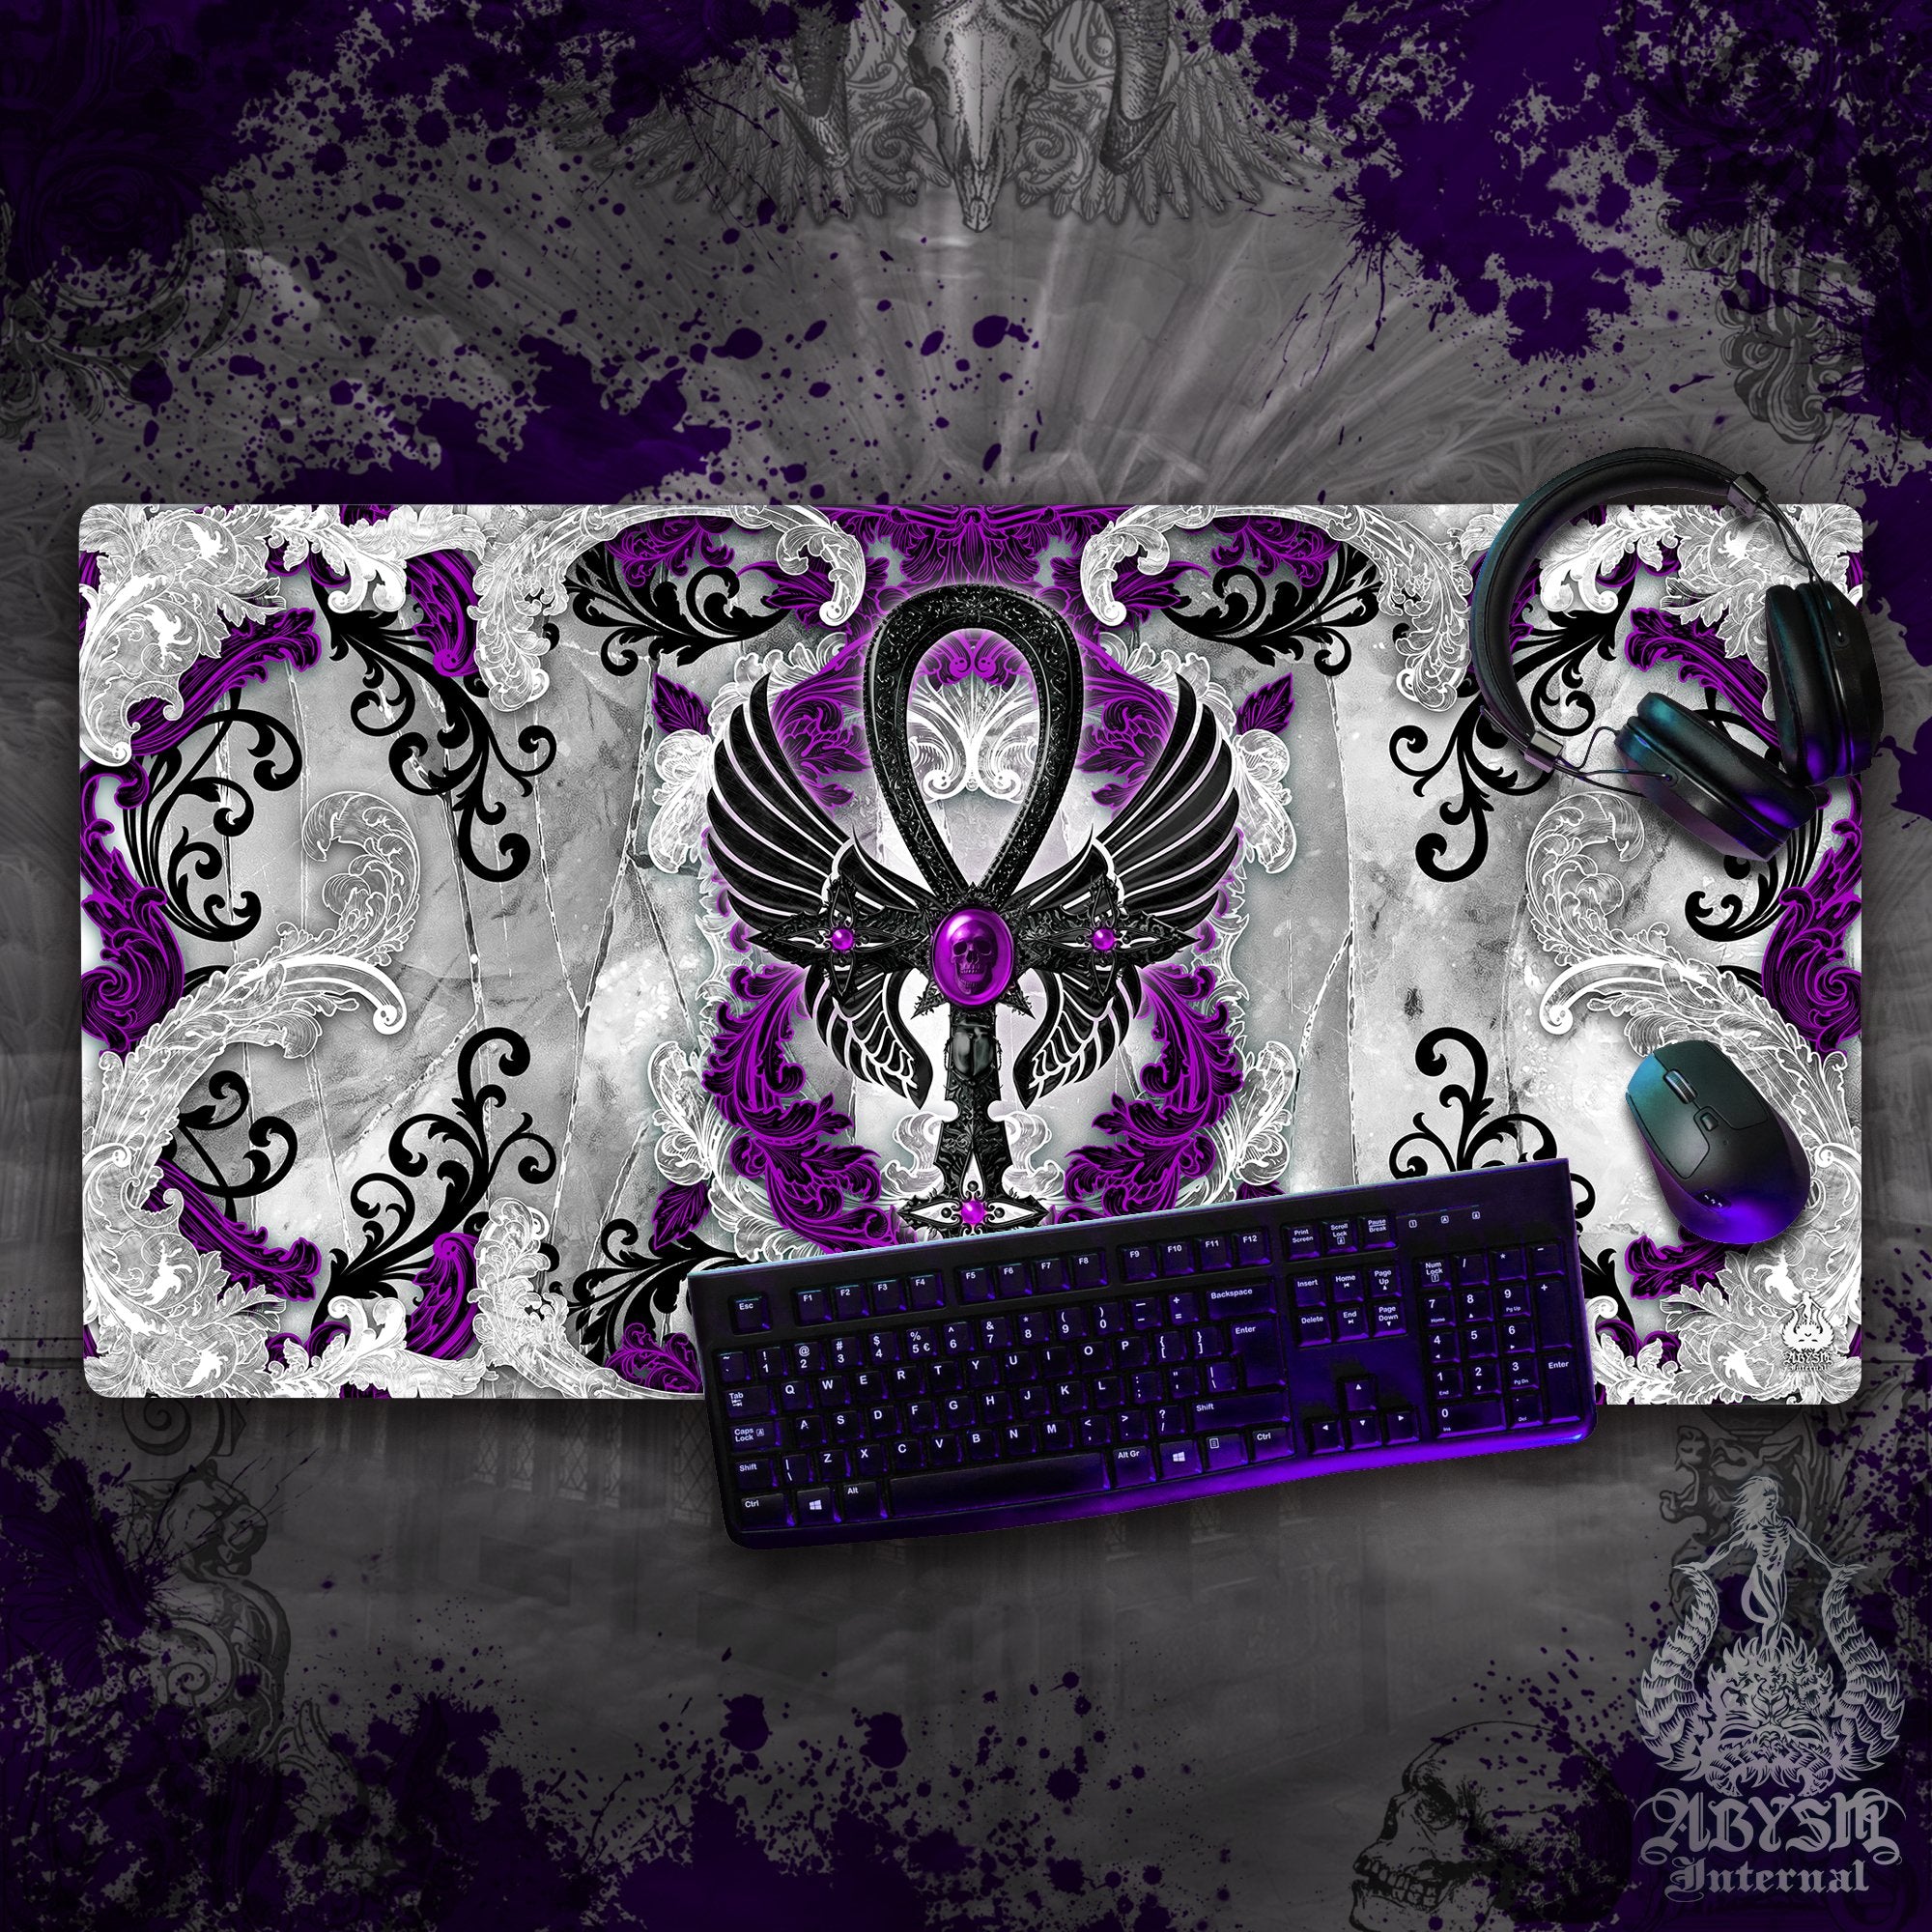 White Goth Gaming Mouse Pad, Ankh Desk Mat, Purple Cross Table Protector Cover, Skull Workpad, Art Print - 3 Colors, Stone Gold - Abysm Internal